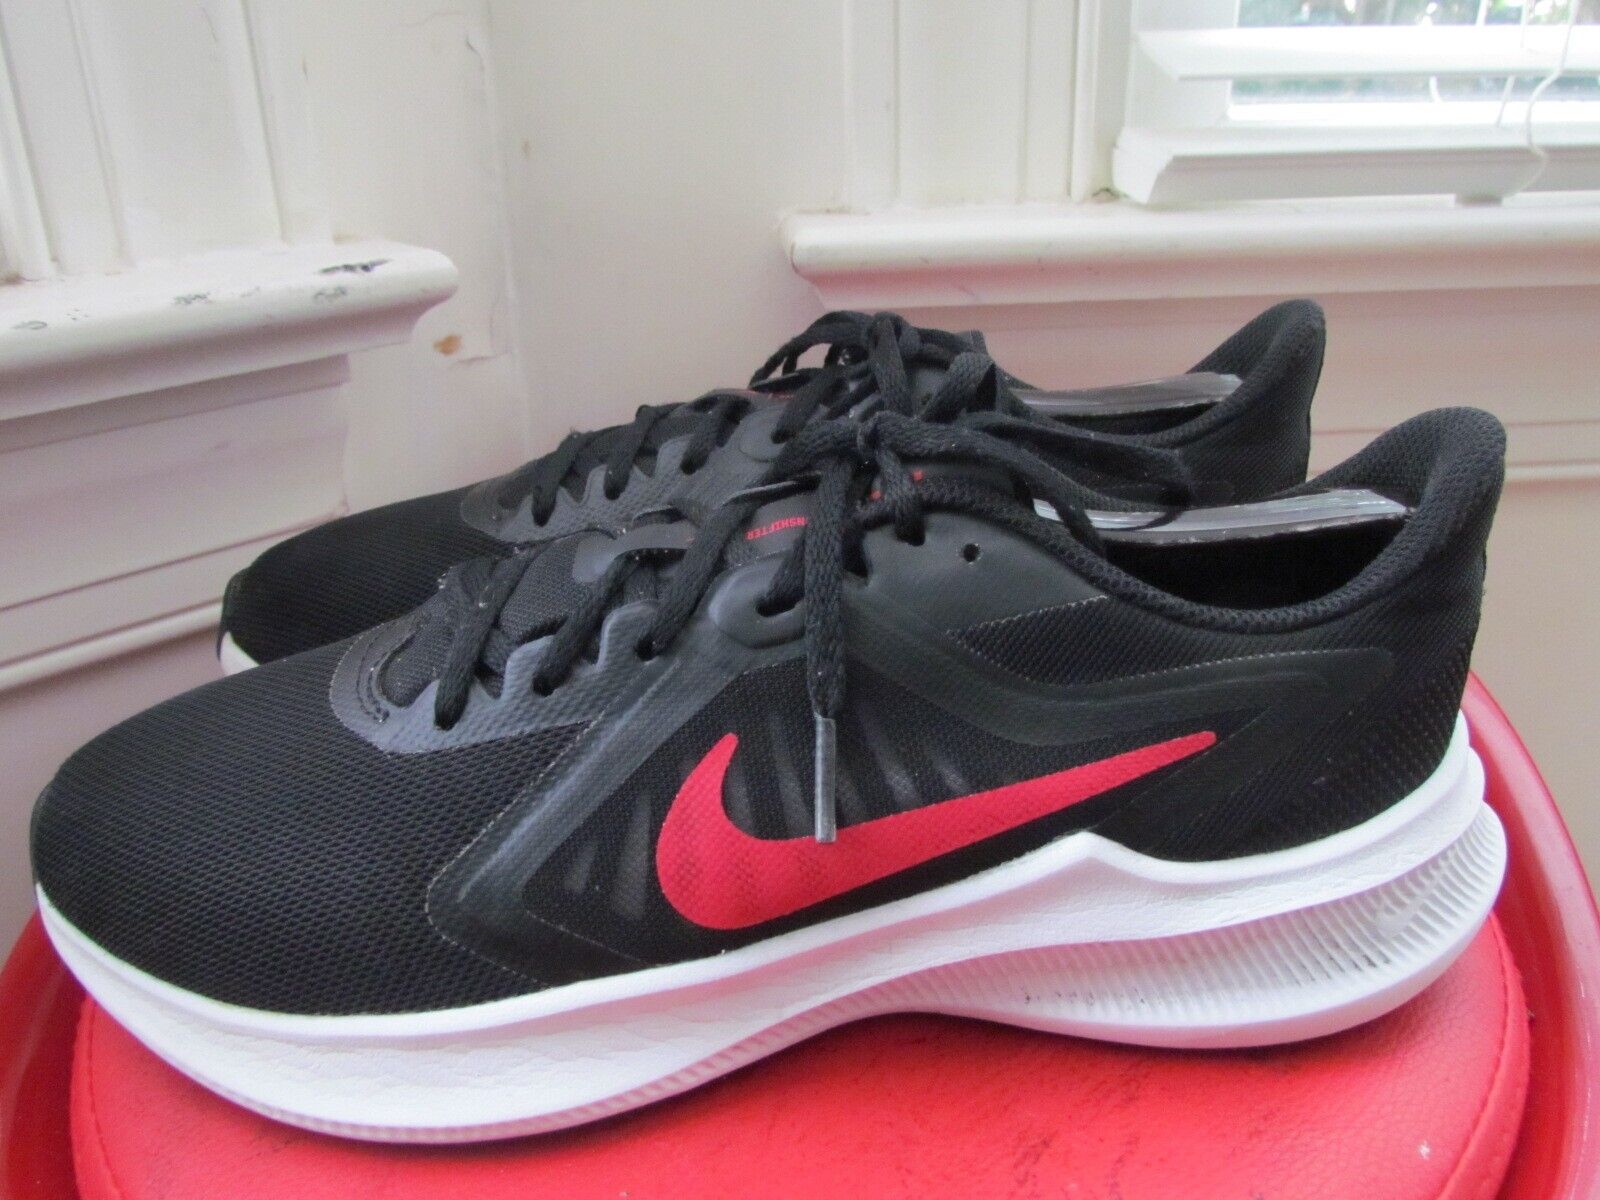 NIKE DOWNSHIFTER 10 MEN'S RUNNING SHOES SIZE 8 - image 1